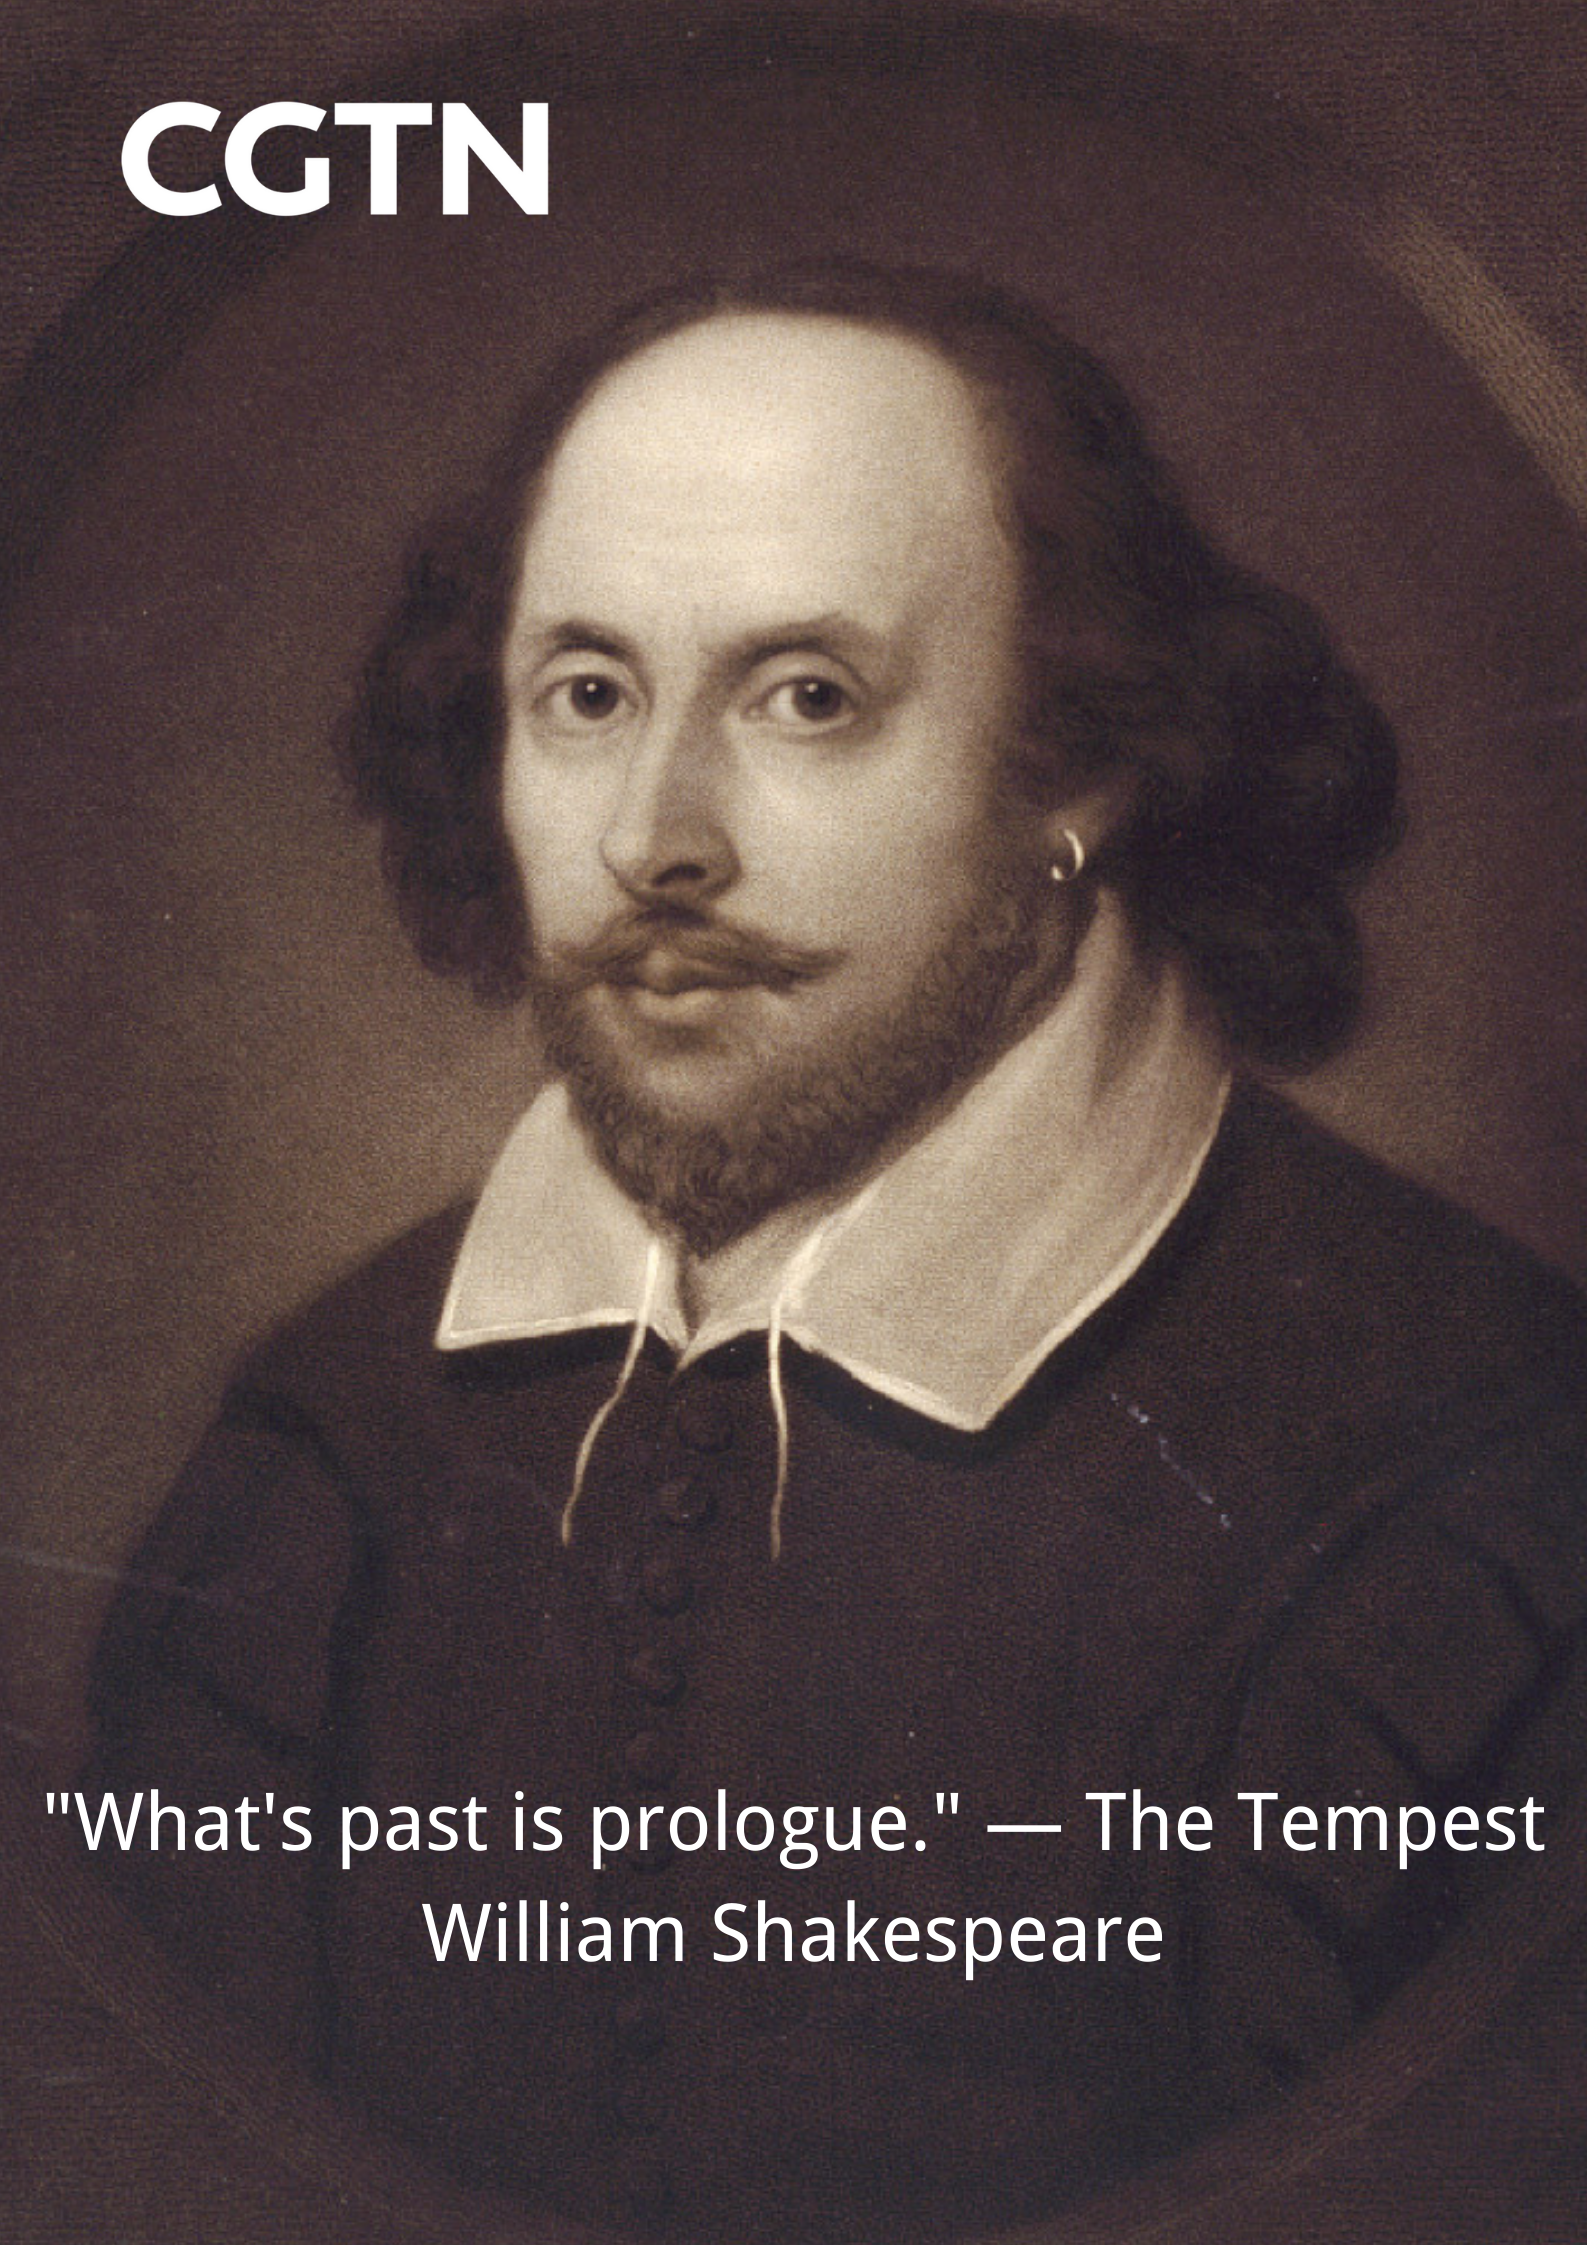 William Shakespeare's quote from 